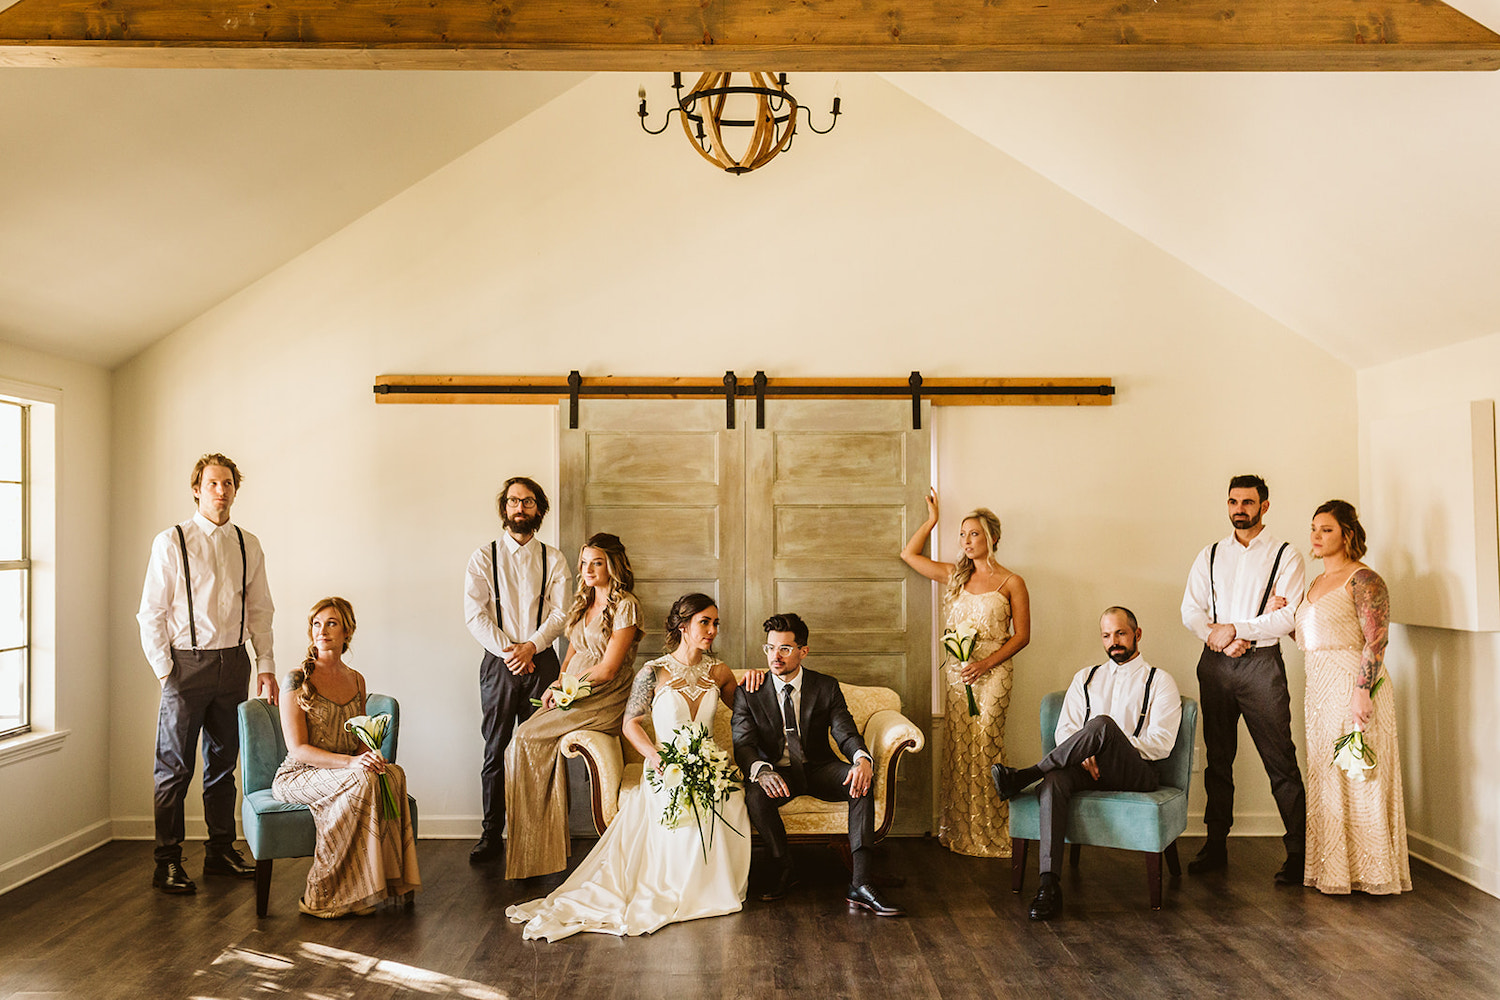 wedding party in a vogue group pose in high ceiling room in front of large barn doors